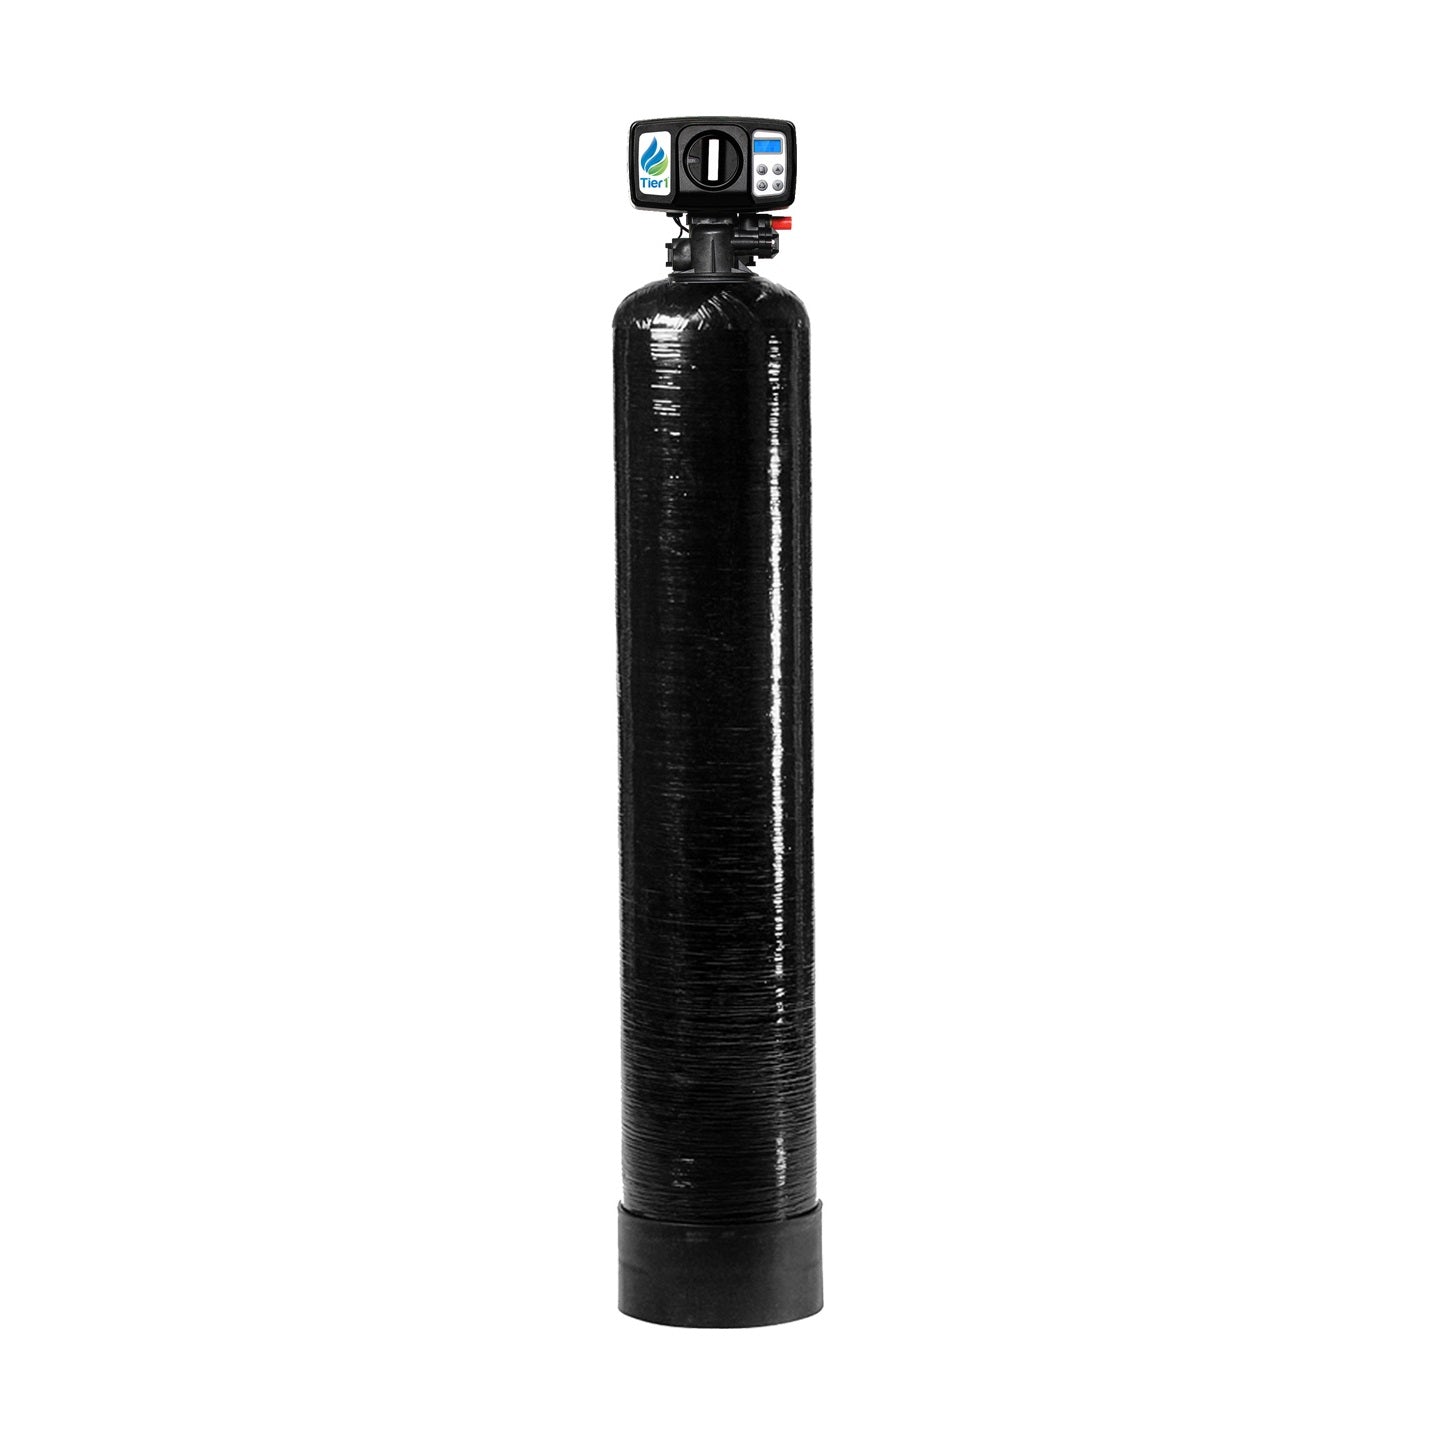 Precision Certified Series Tier1 30,000 Grain High Efficiency Digital Water Softening System for Hardness, Iron and Manganese Reduction